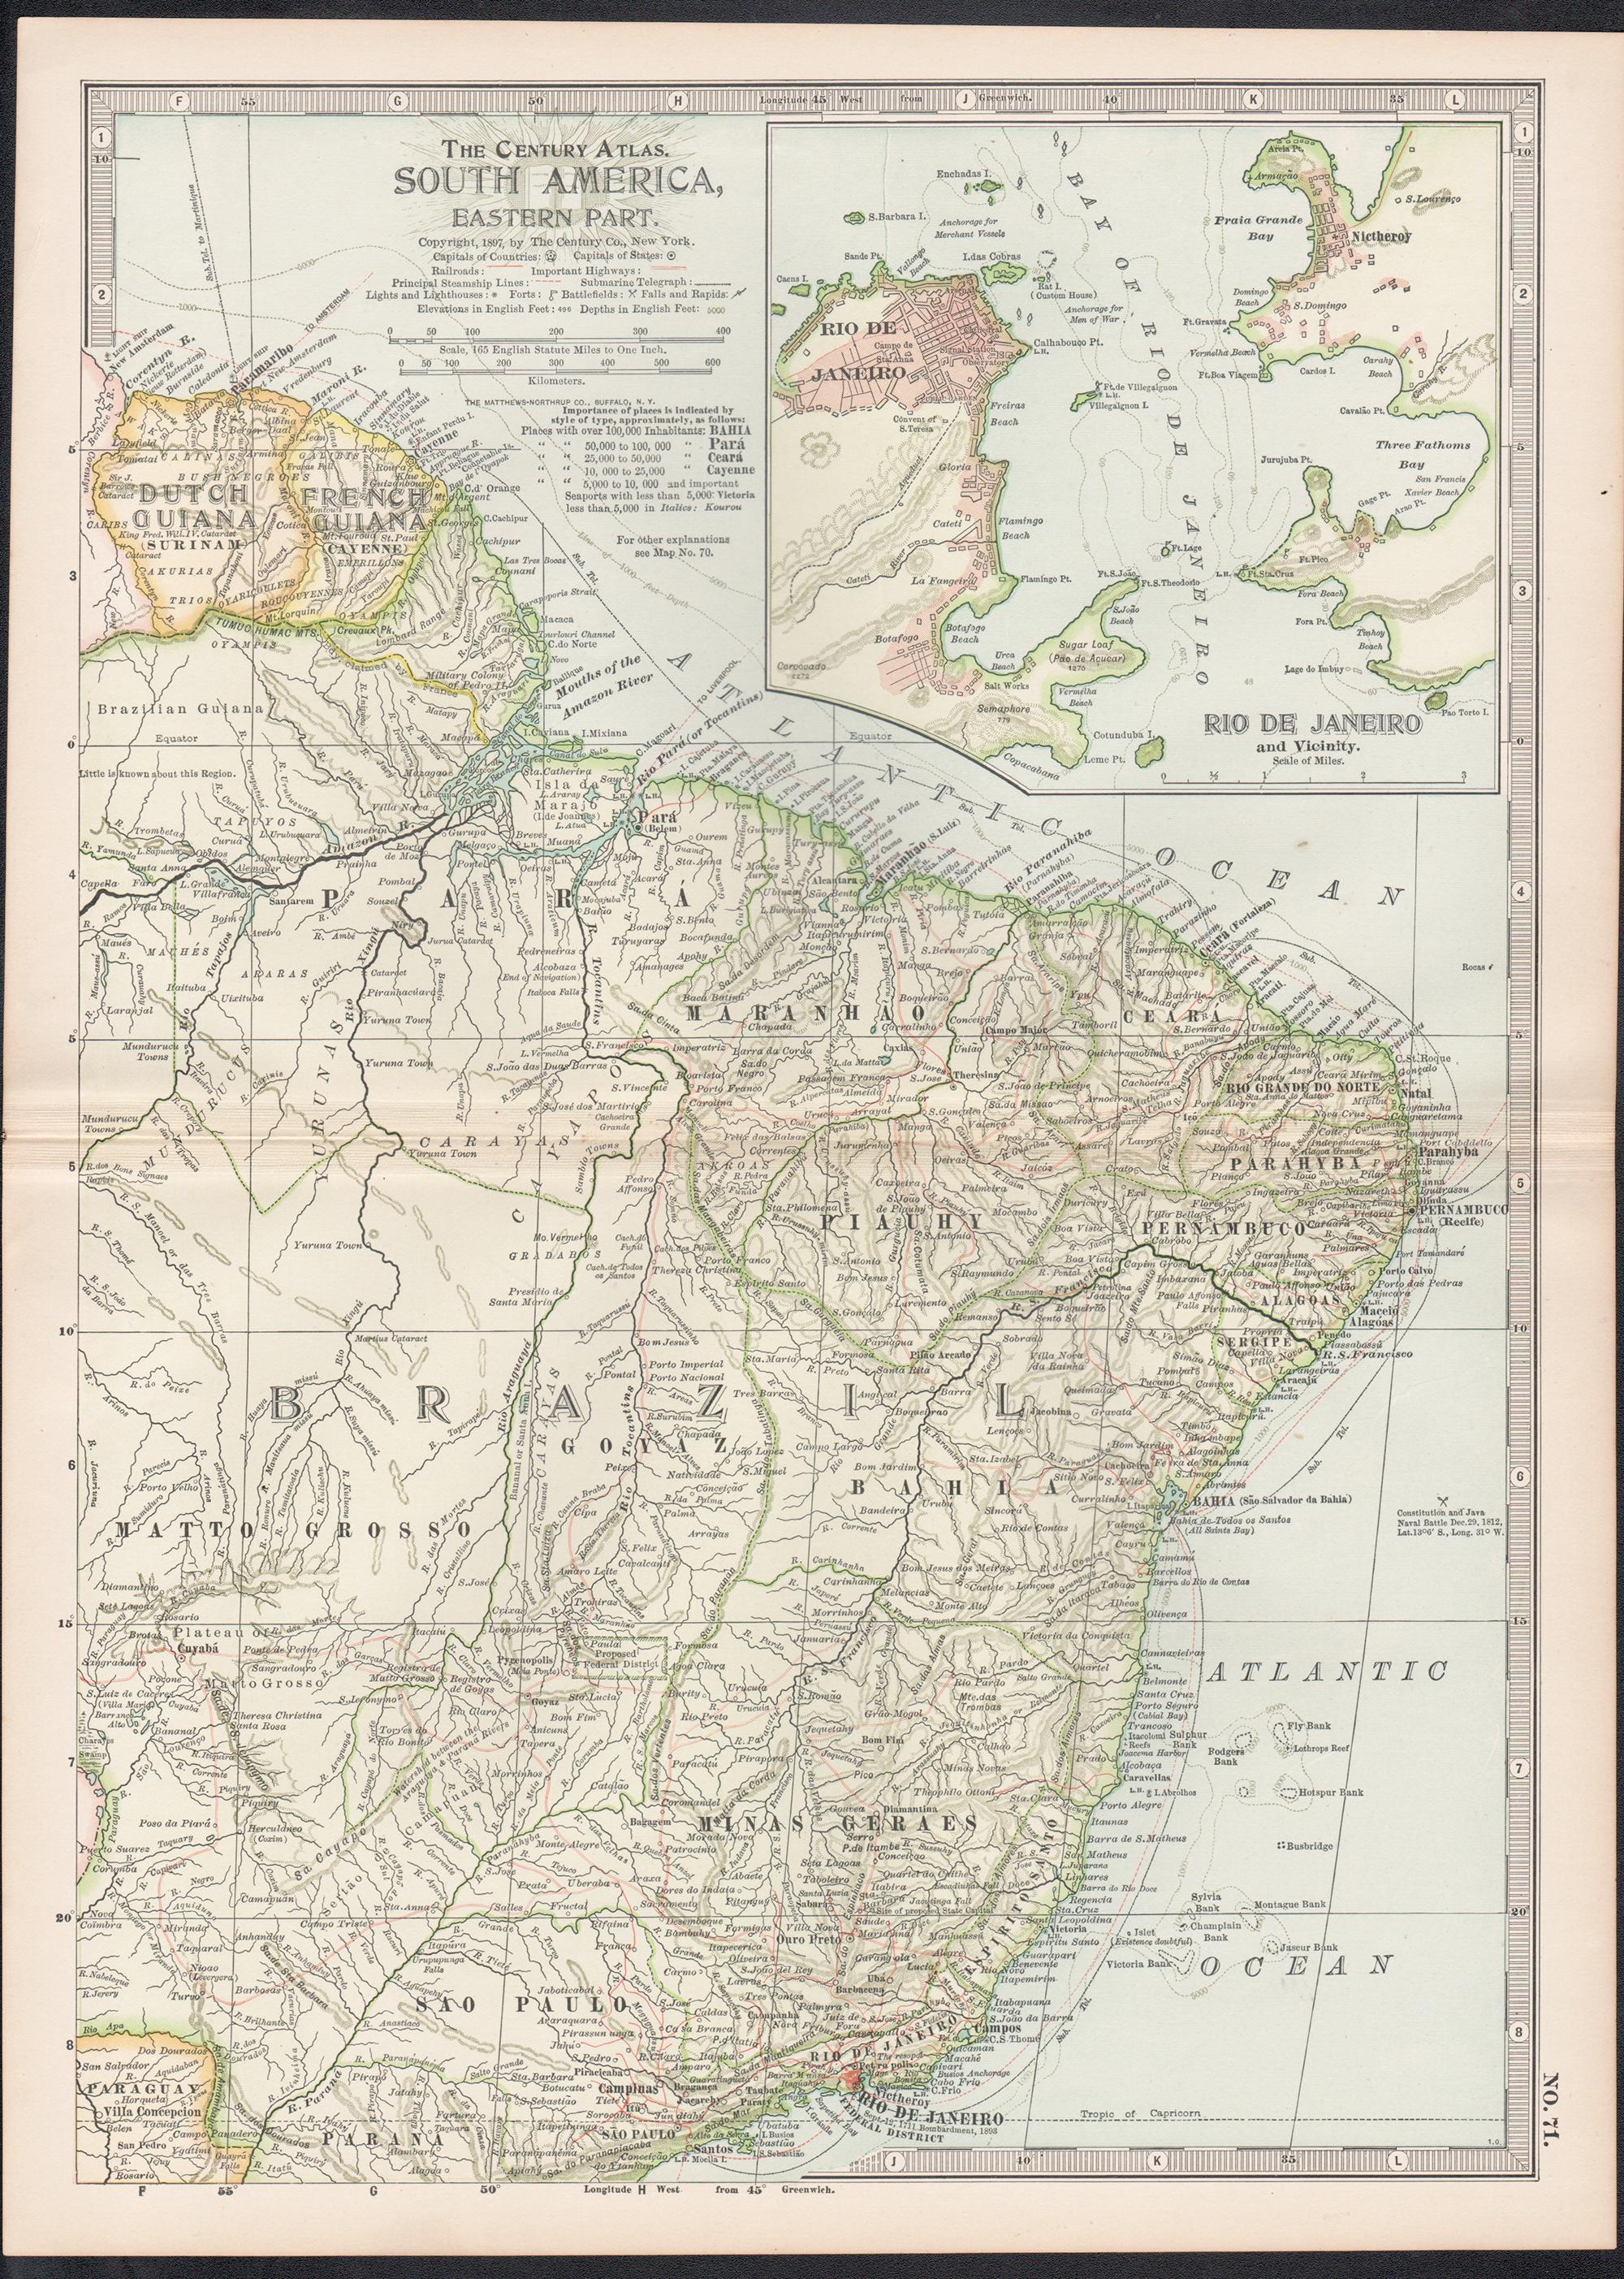 South America, Eastern Part. Century Atlas antique vintage map - Print by Unknown